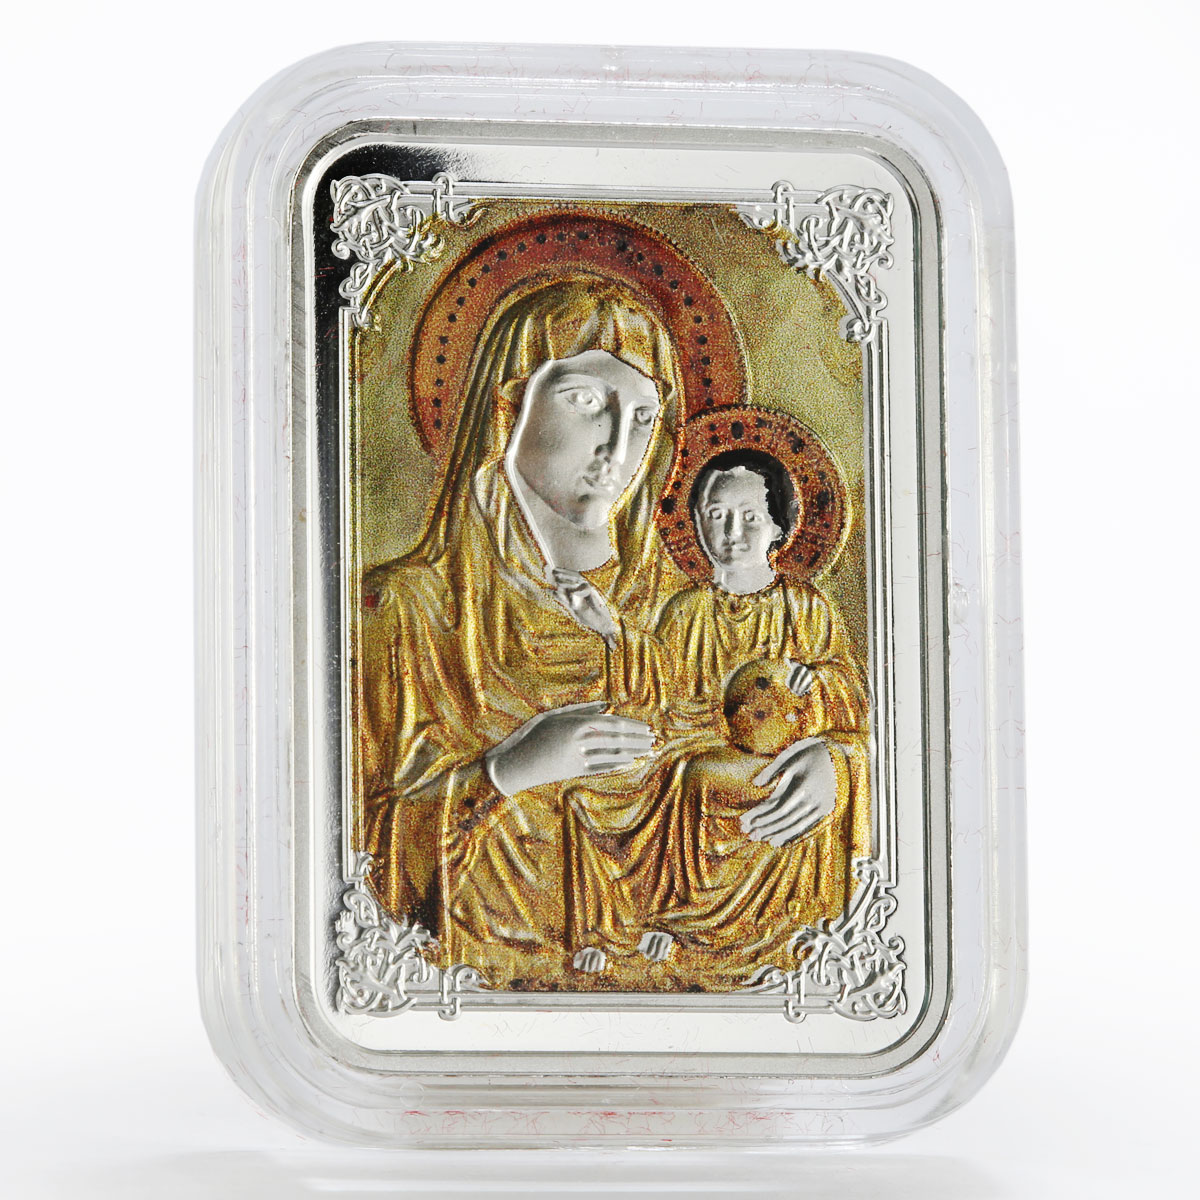 Niue 1 dollar Theotokos Icon of Jerusalem colored proof silver coin 2014